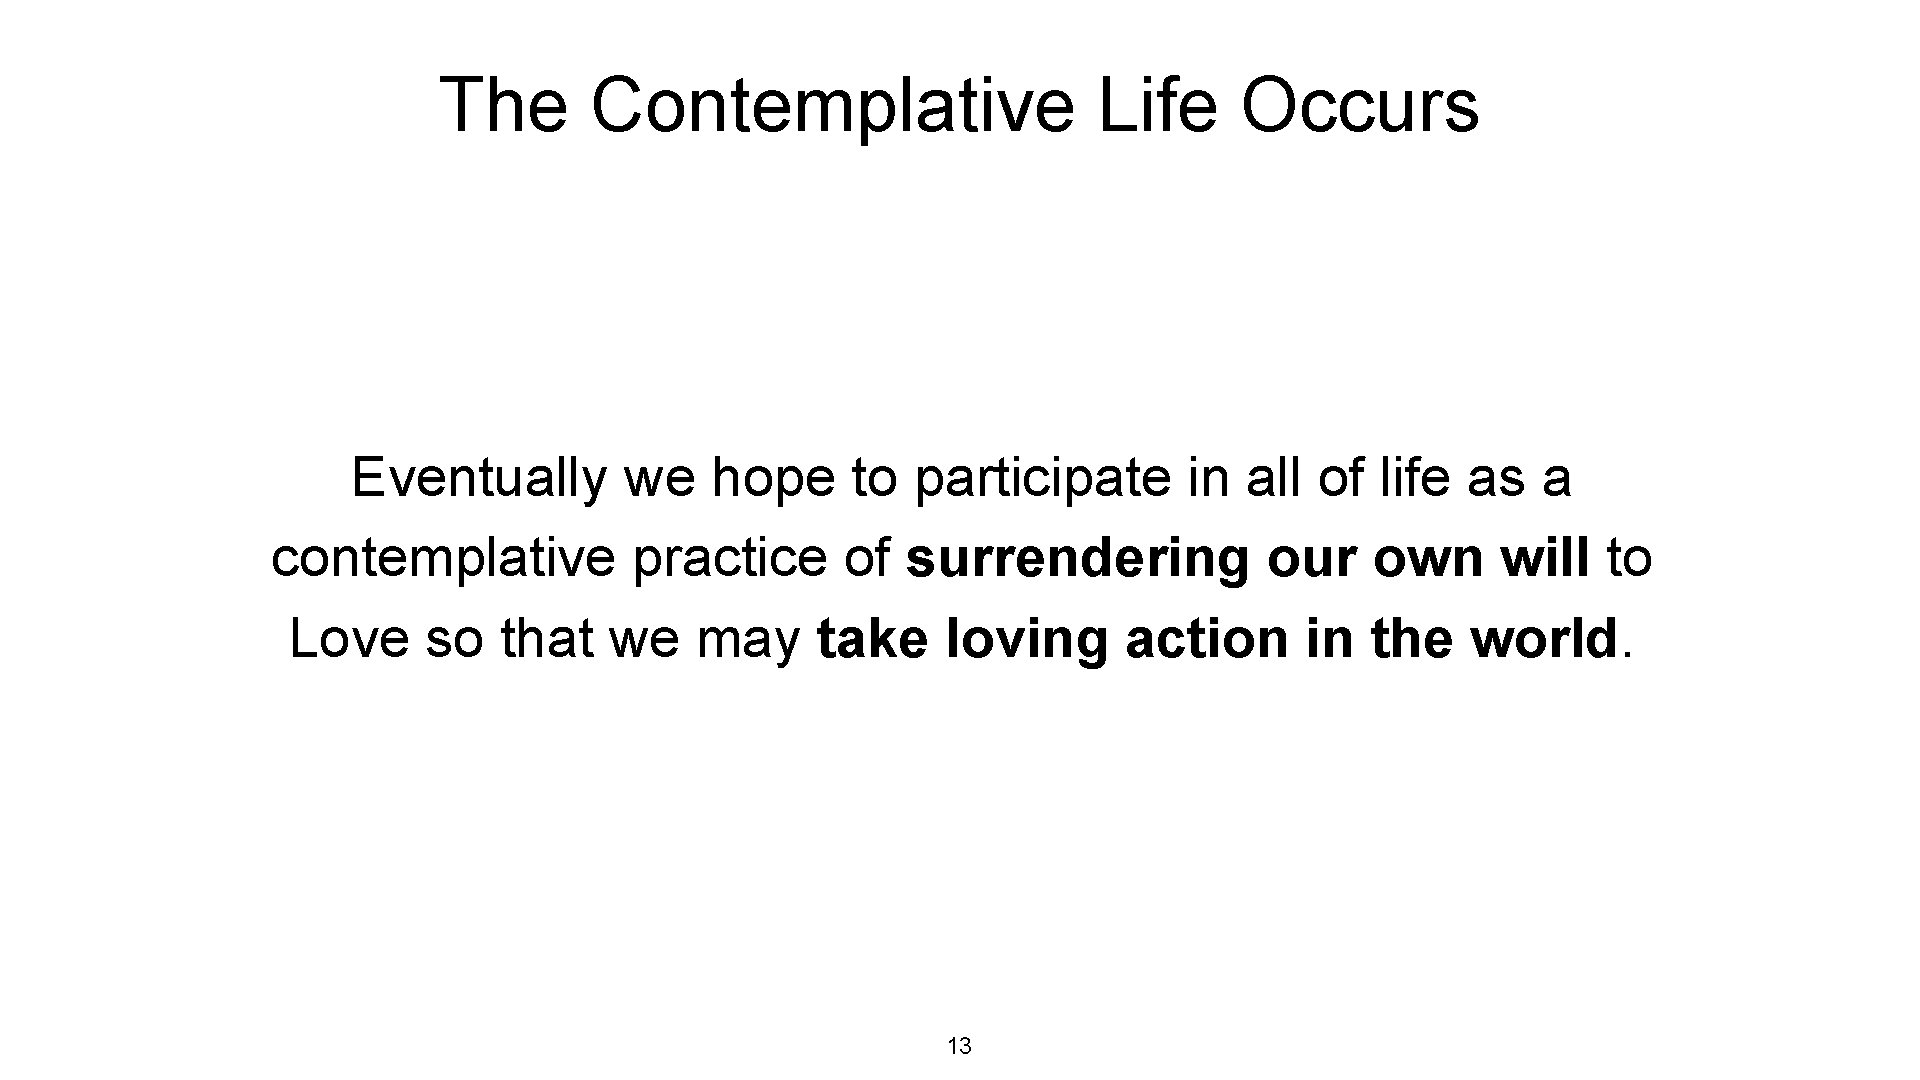 The Contemplative Life Occurs Eventually we hope to participate in all of life as